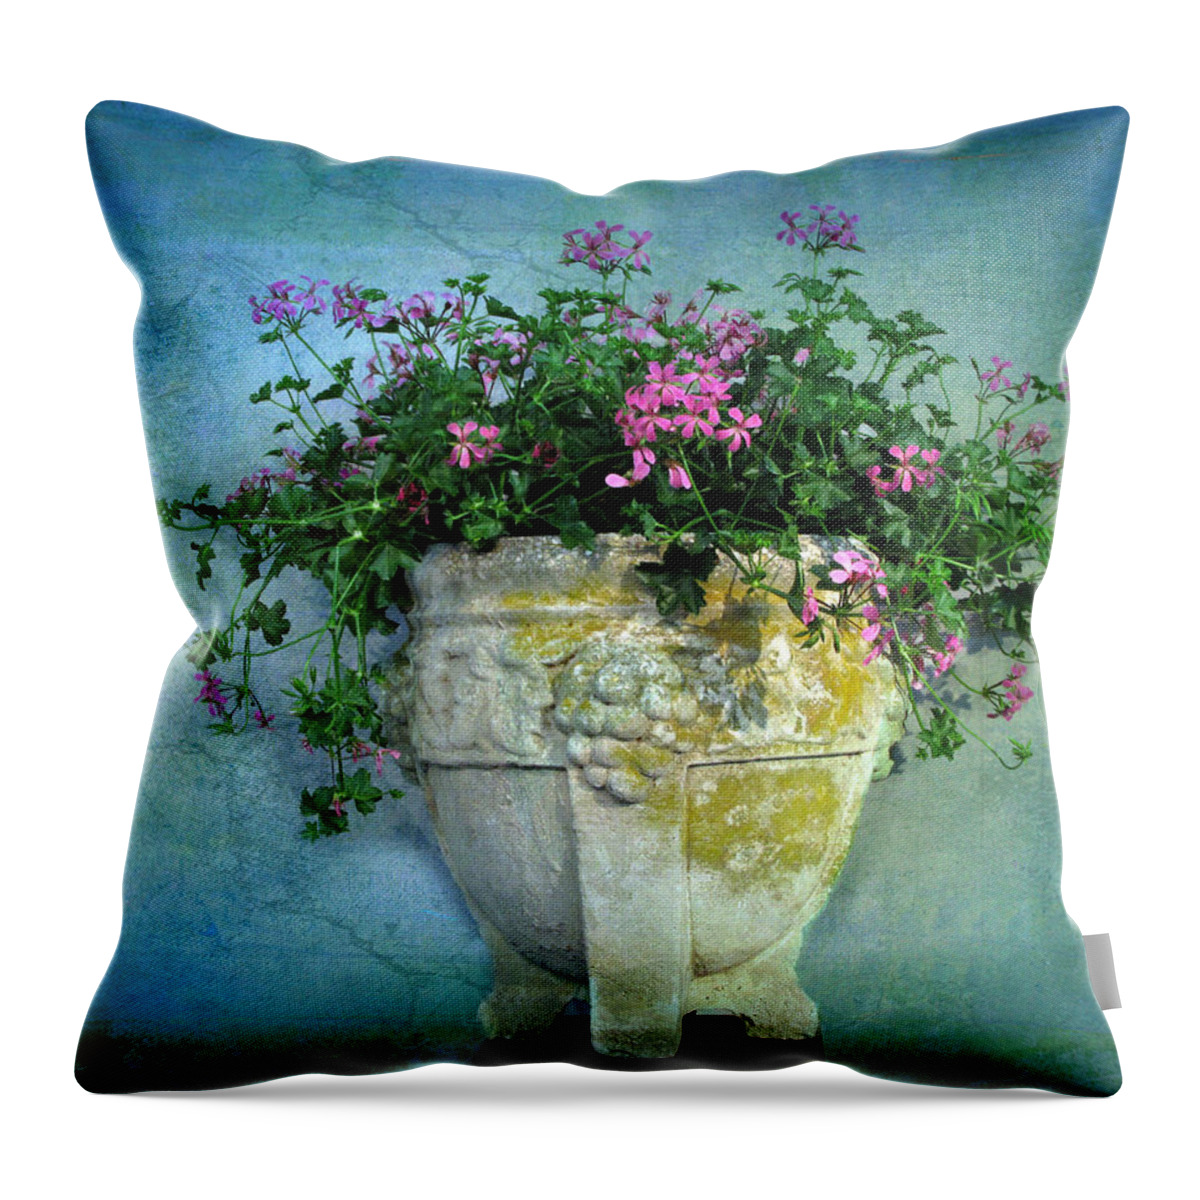 Planter Throw Pillow featuring the photograph Garden Planter #2 by Jessica Jenney